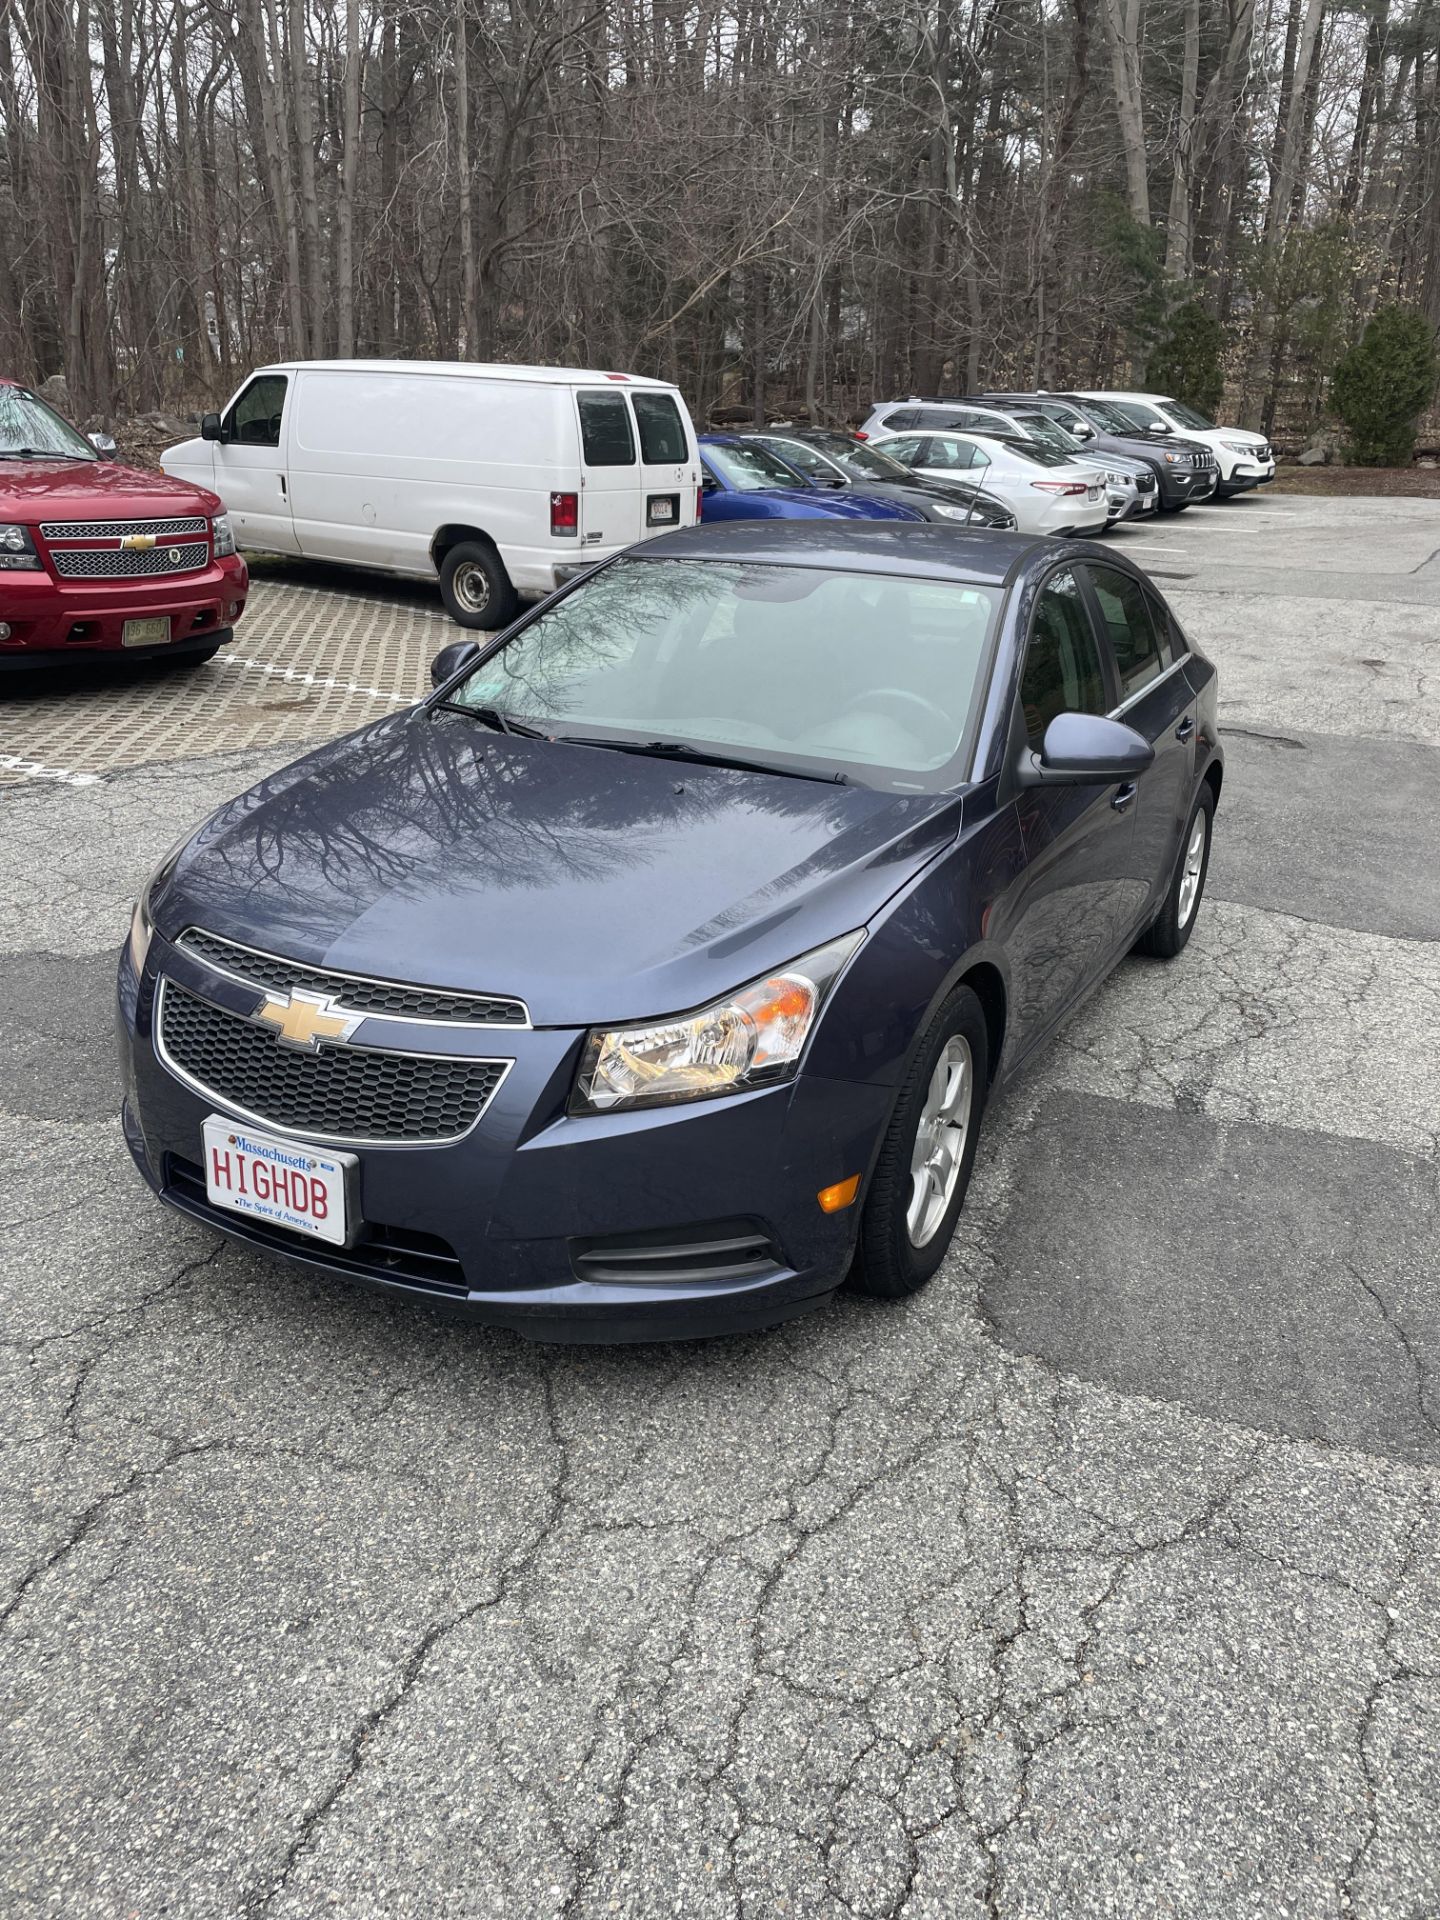 2013 Chevy Cruze Odom: 25,066, Vin:1GC1PC5SB5D7141735 (Has Ceiling Liner Issues) (THIS UNIT CAN'T BE - Image 2 of 16